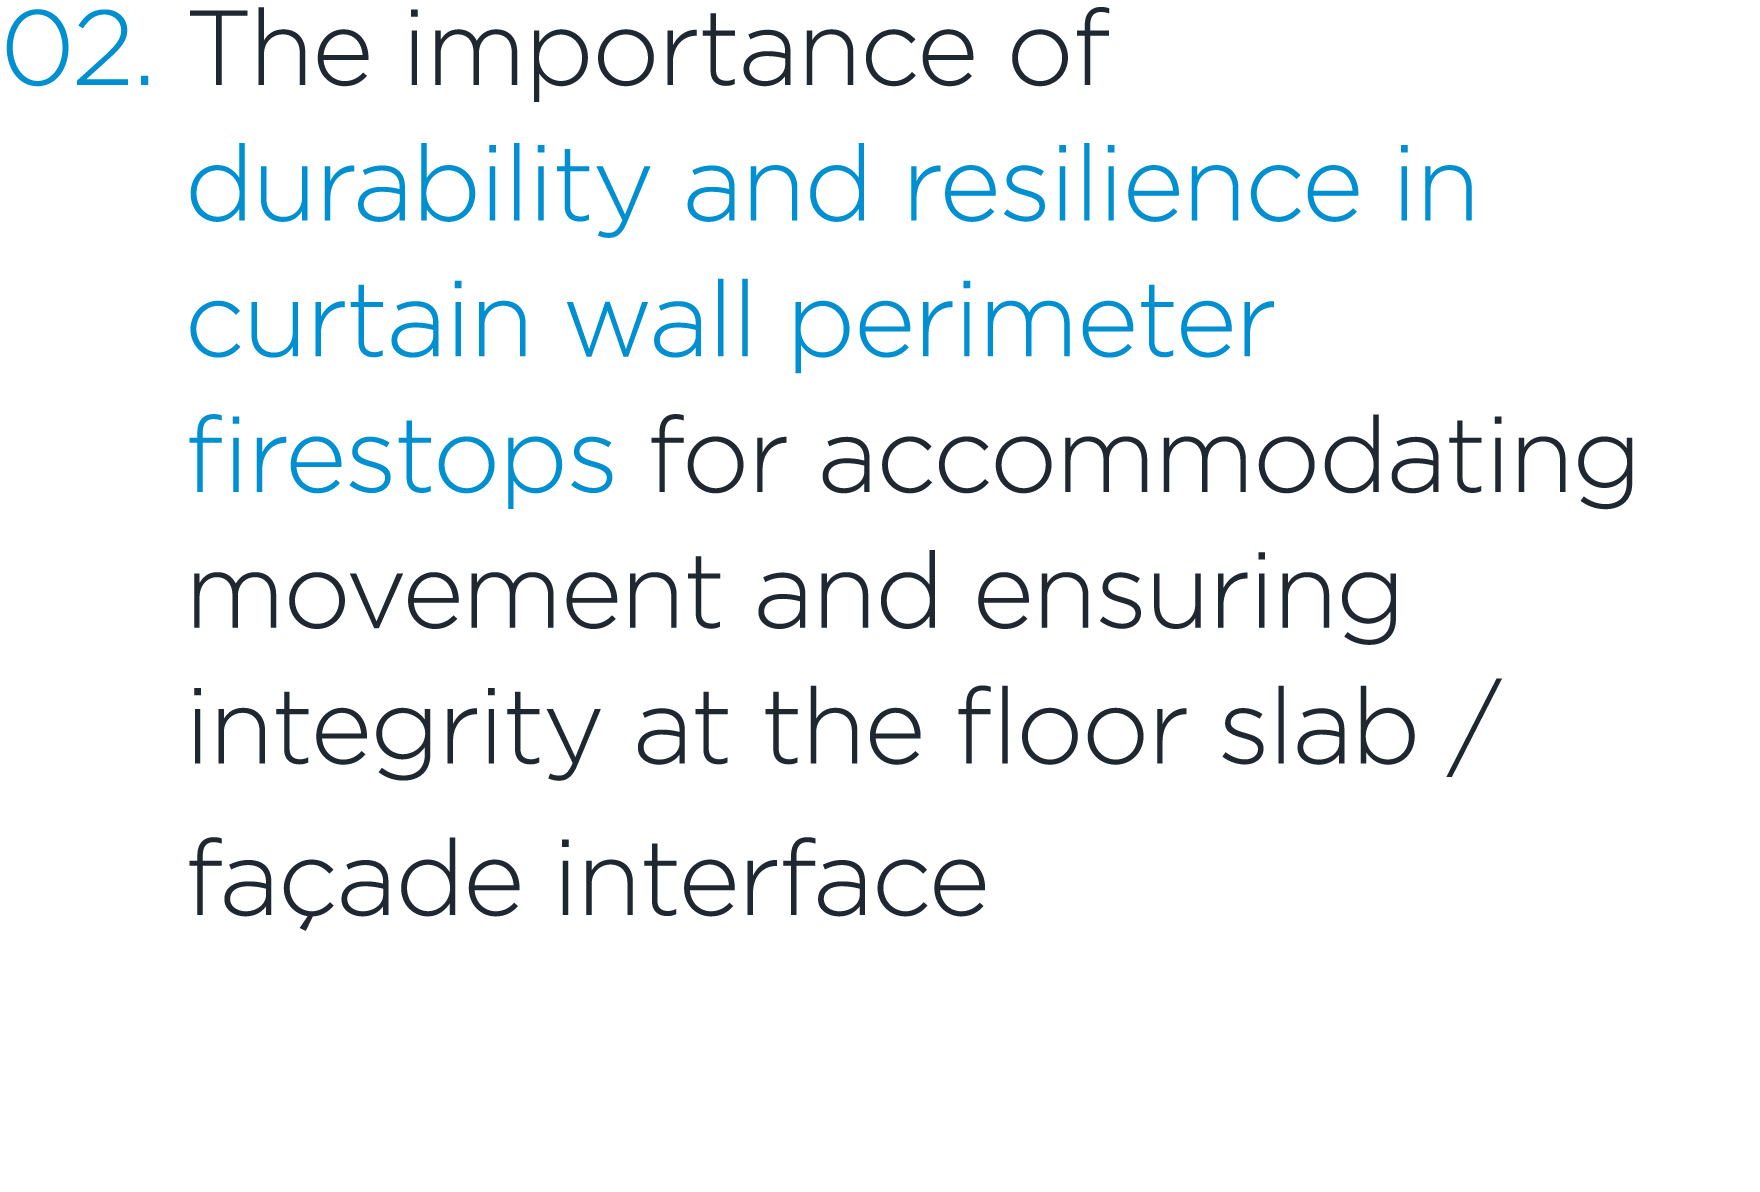 02. The importance of durability and resilience in curtain wall perimeter firestops for accommodating movement and en...